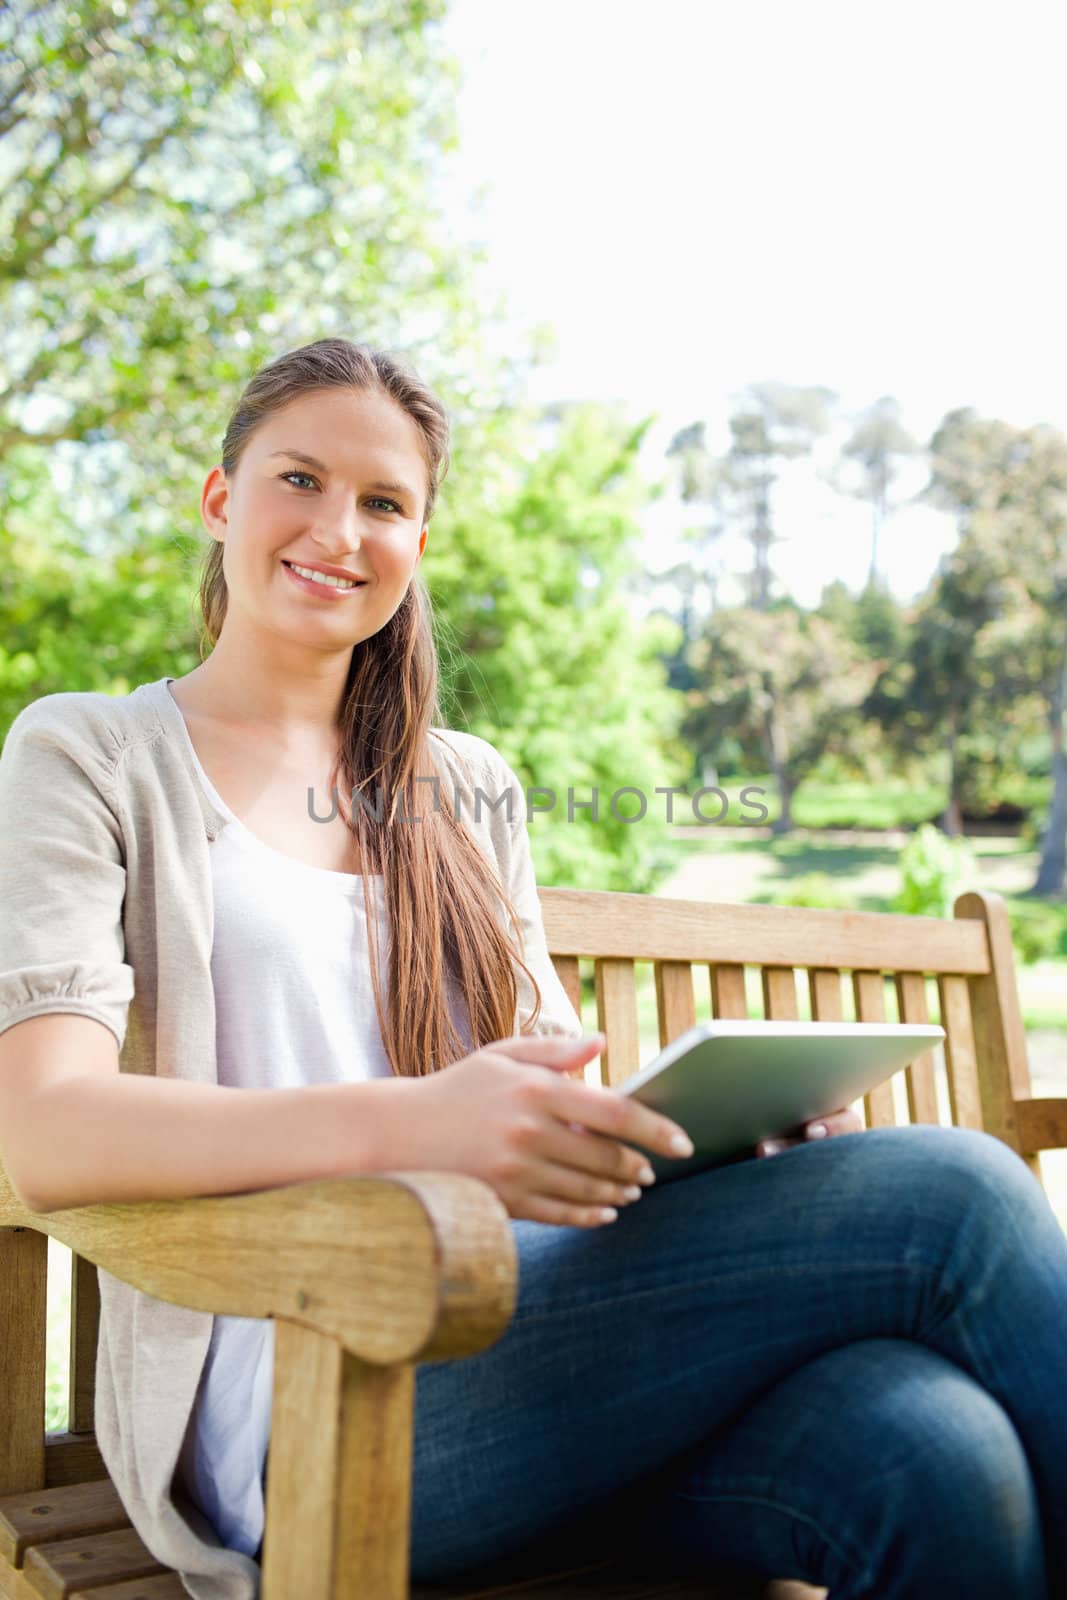 Smiling young woman sitting on a bench with her tablet computer